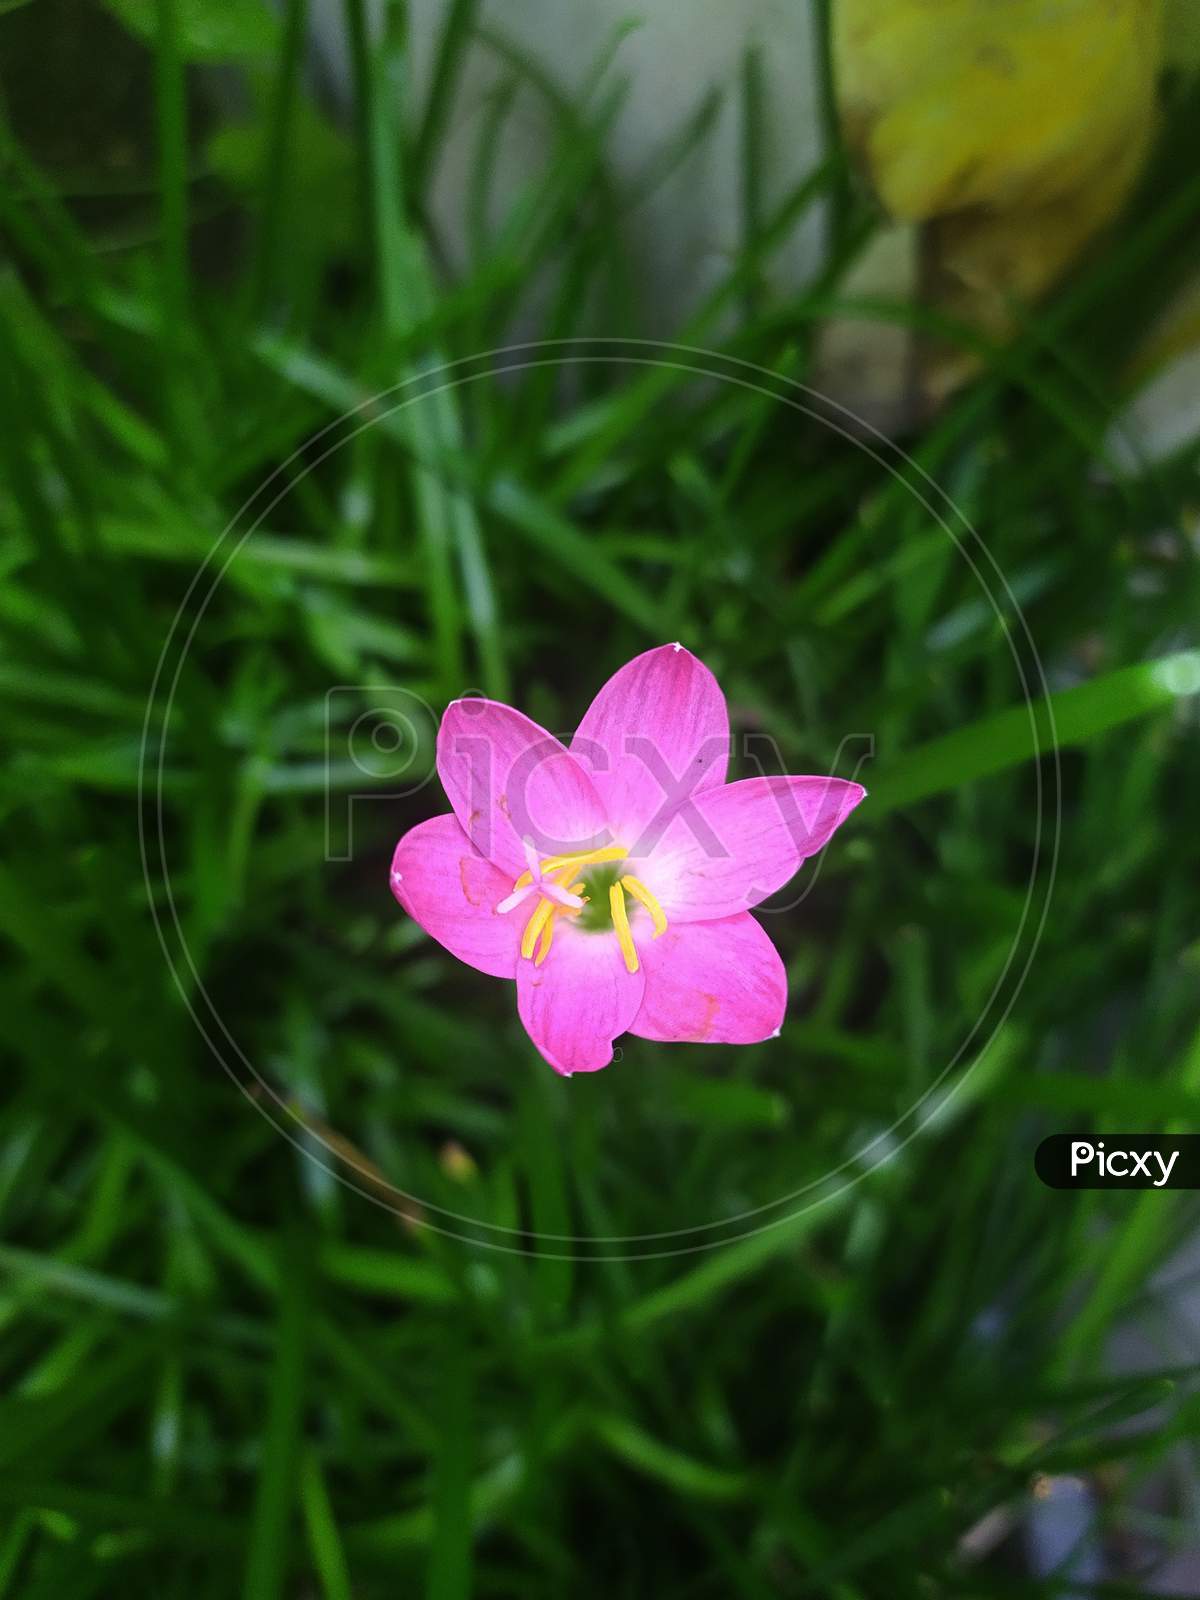 Pink rain lily in a green leafs background, Zephyranthes rosea